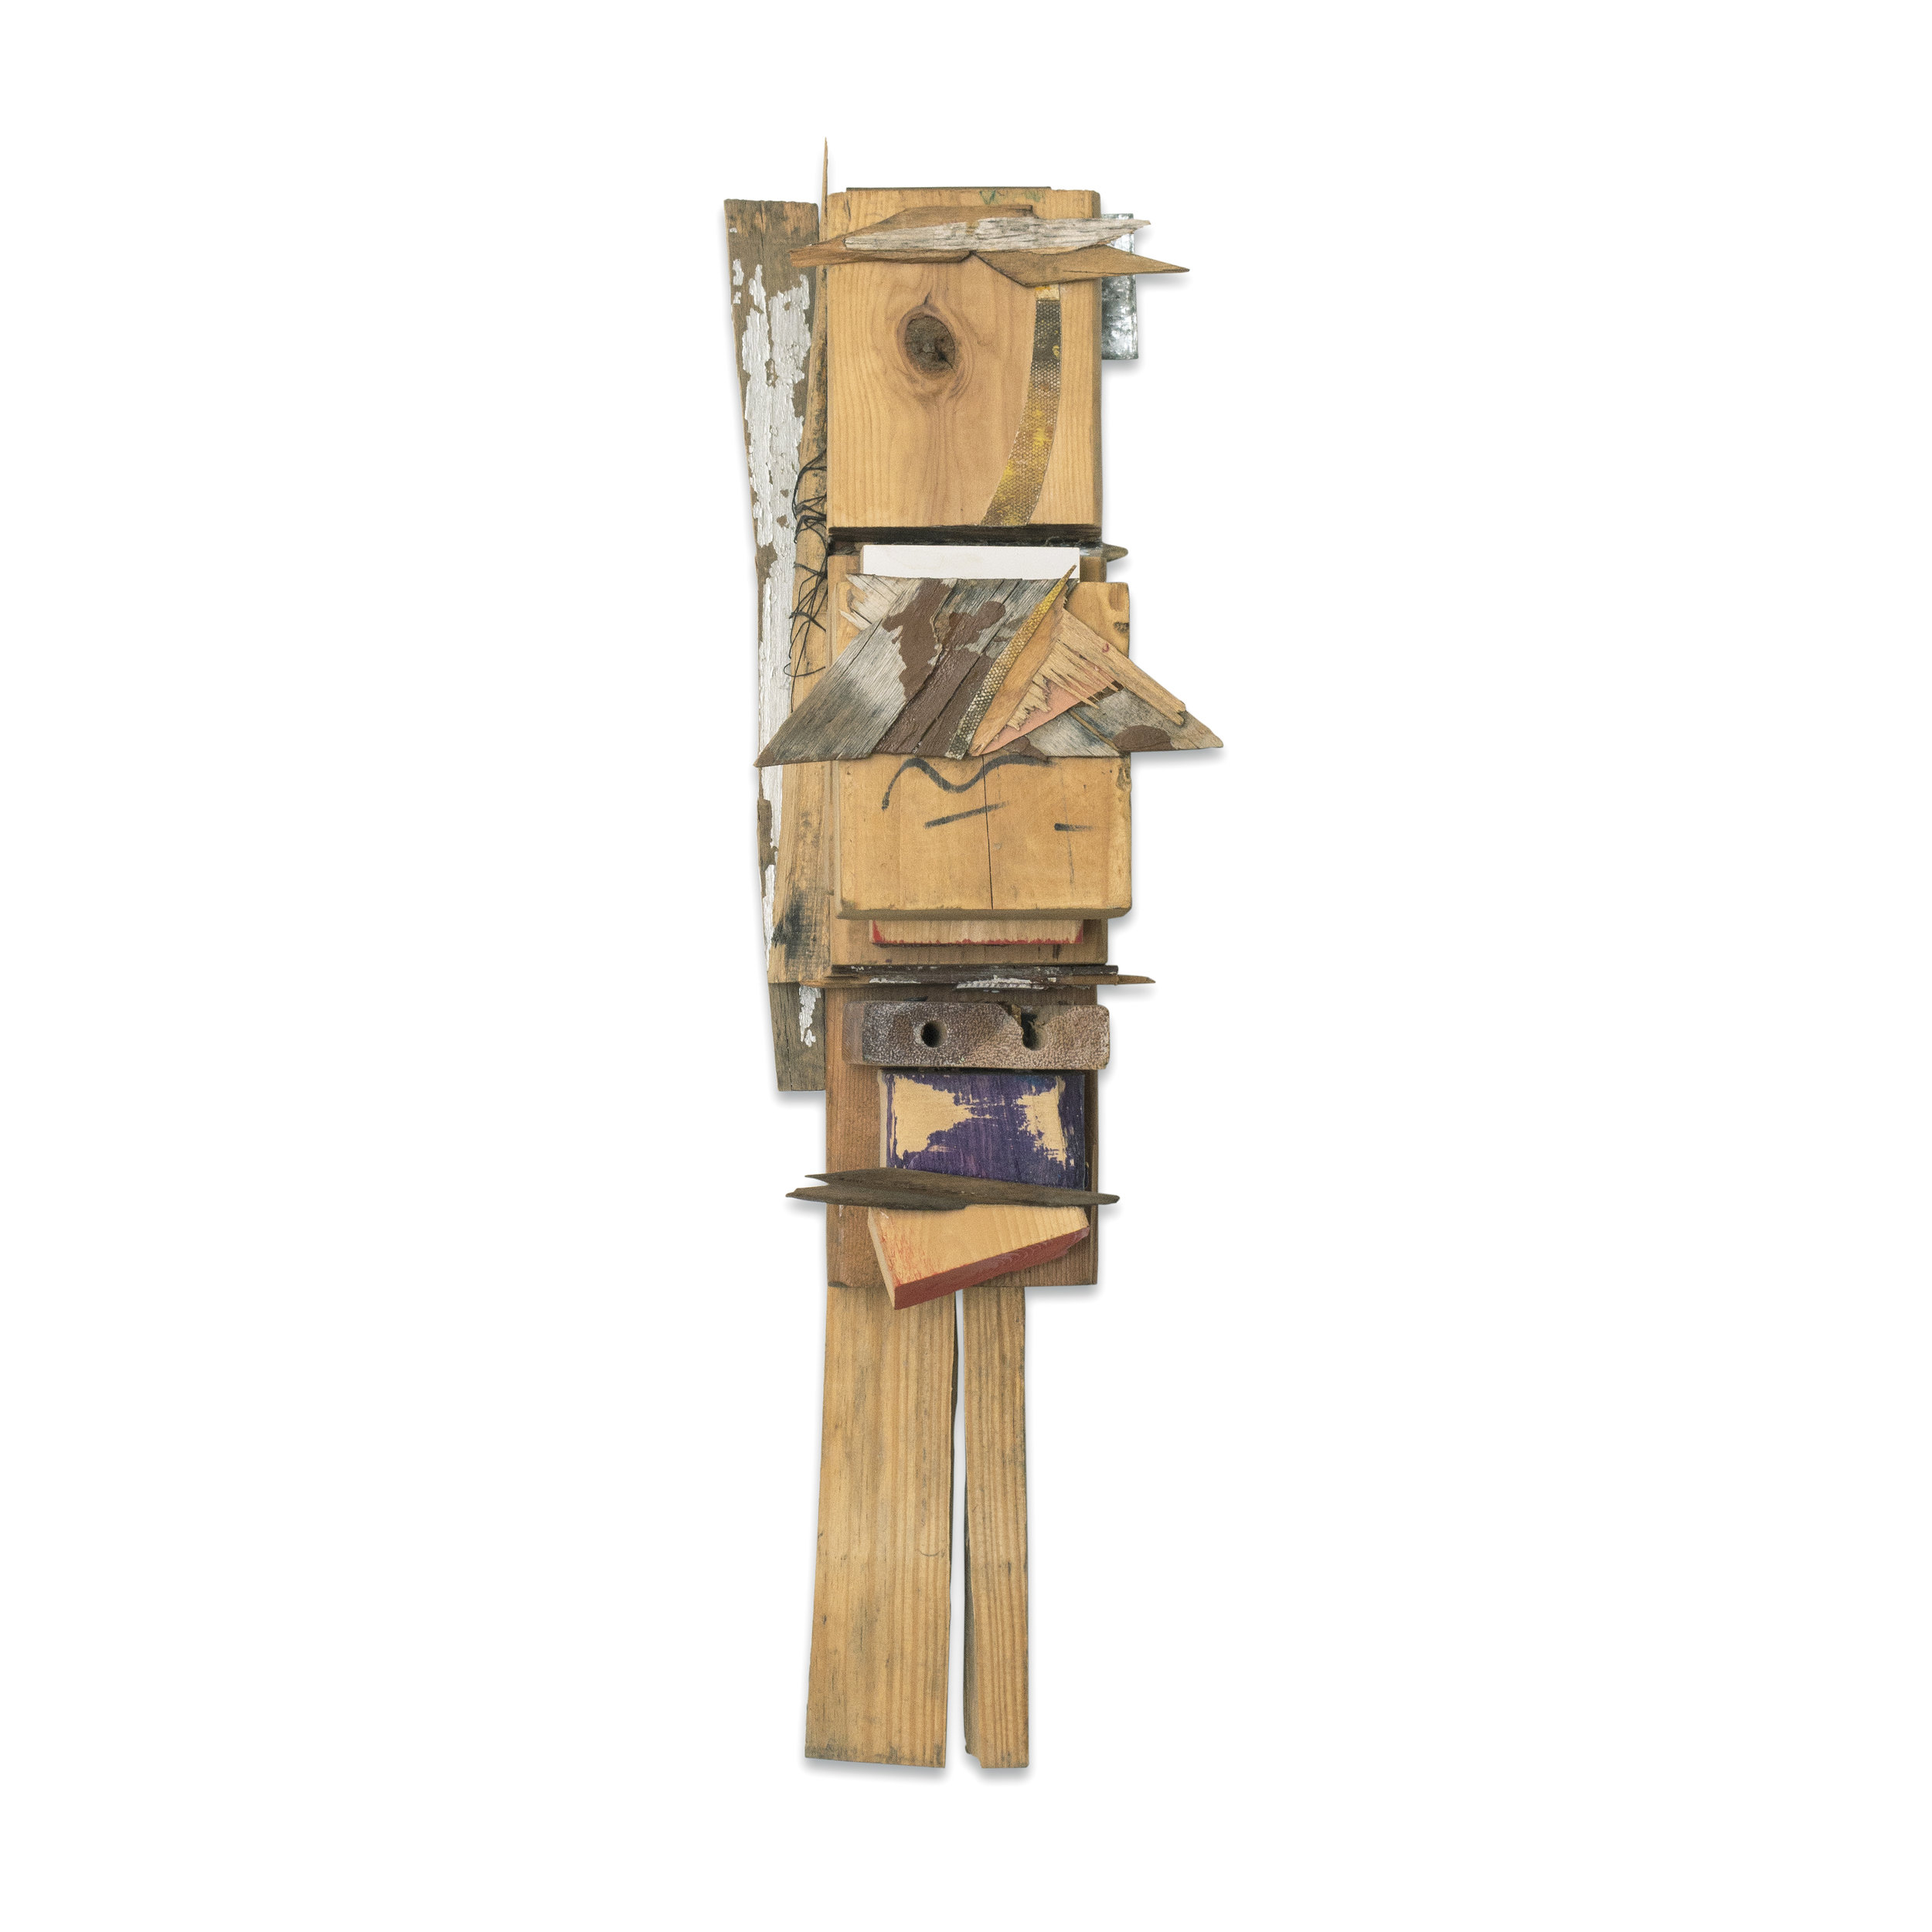  TOTEM 2016 found wood and mixed media 20 x 8 x 5.5 in 